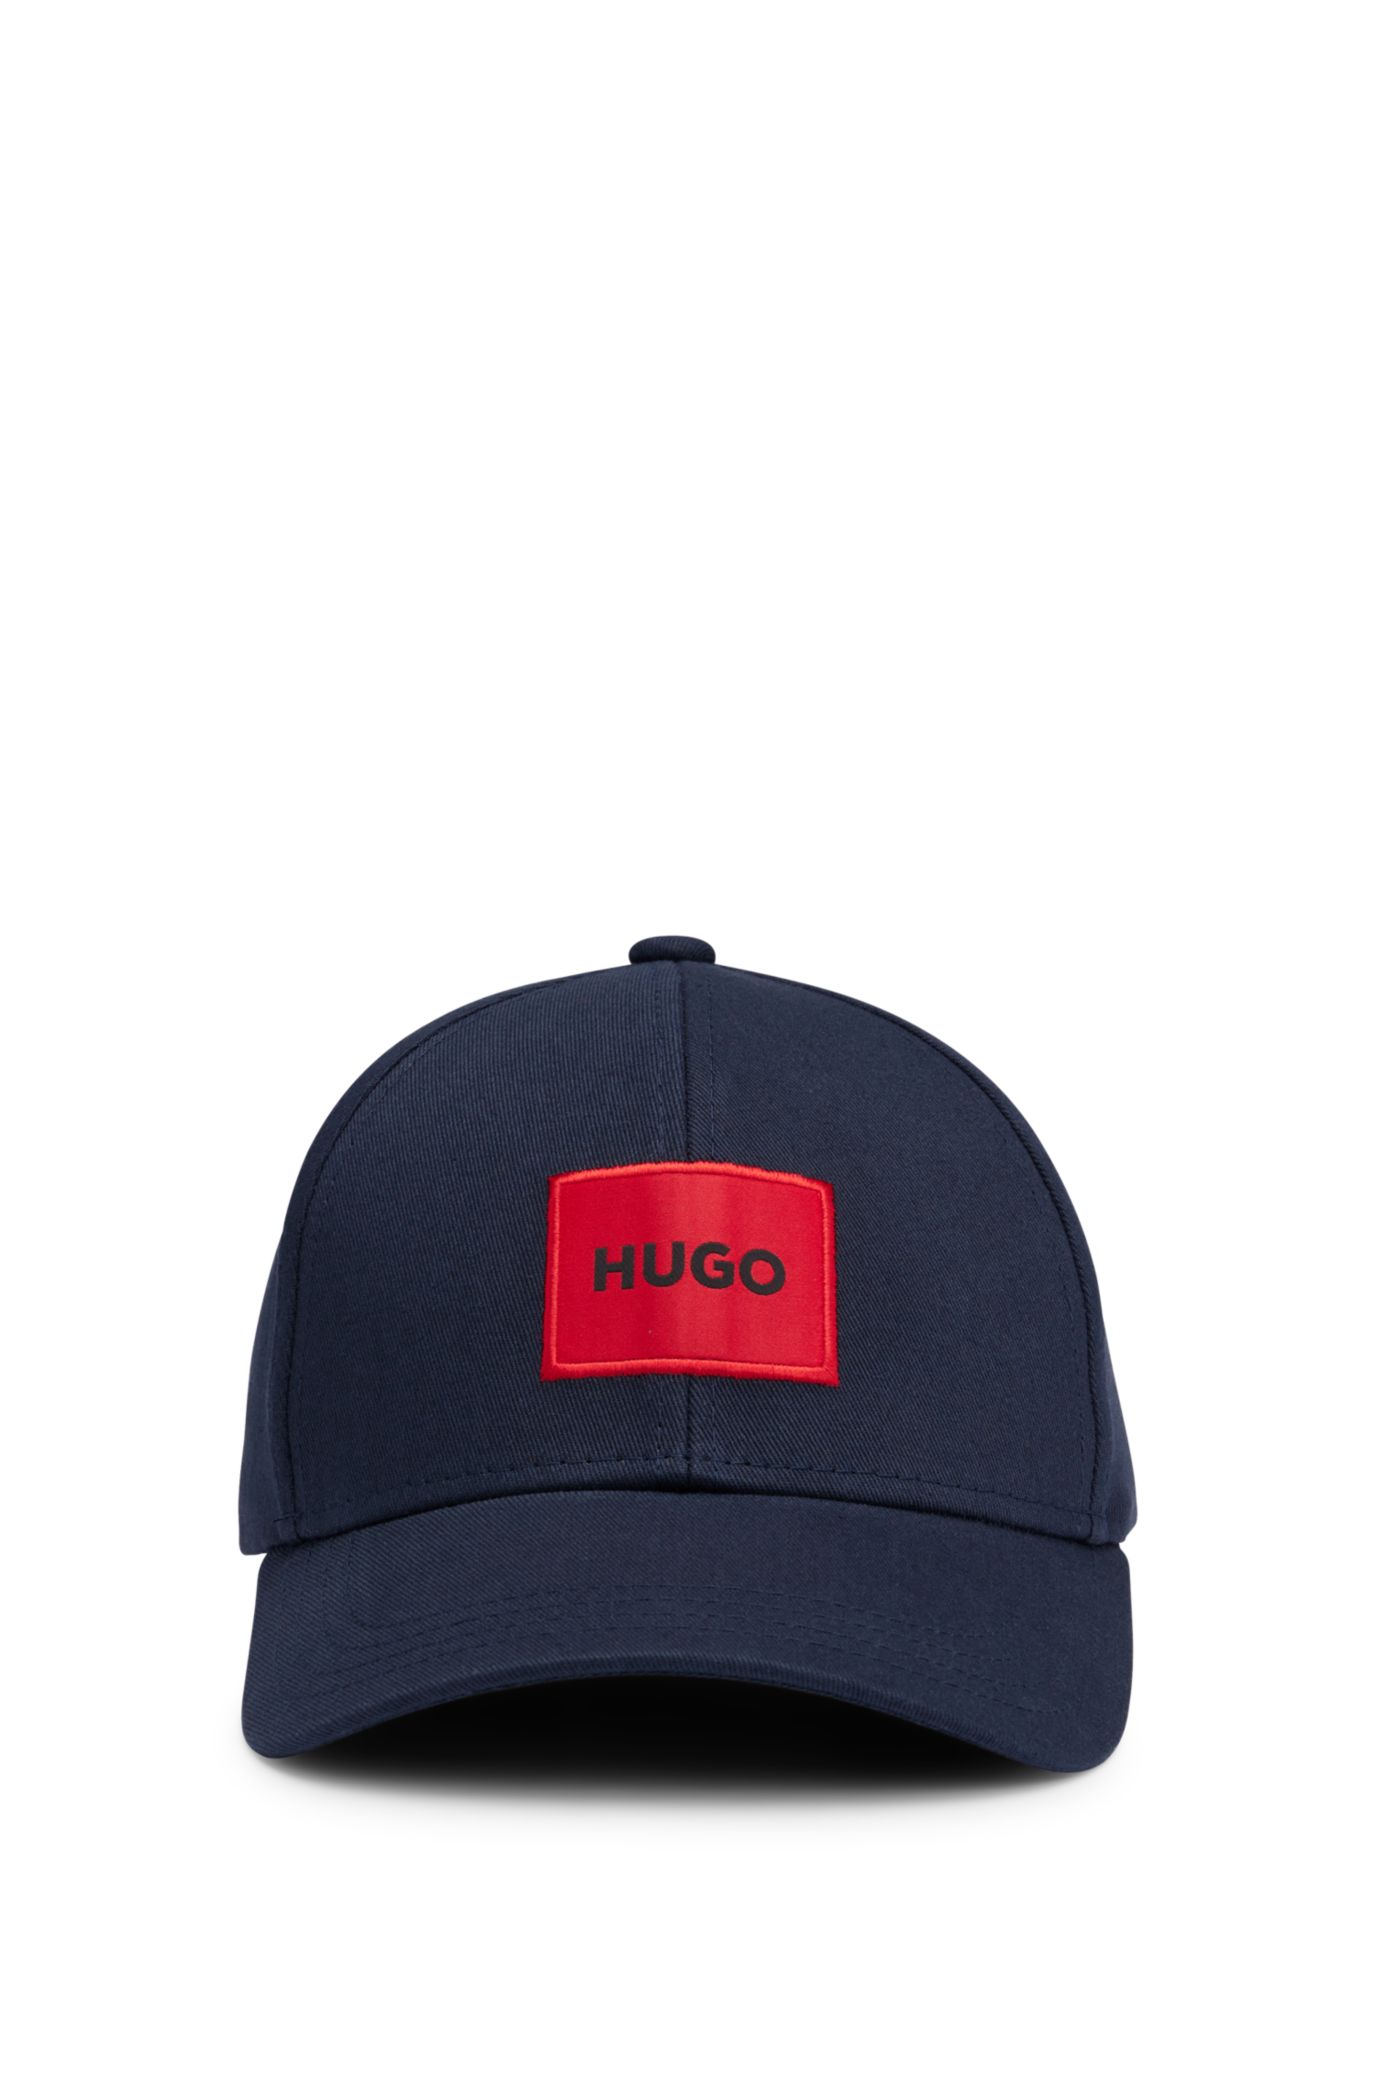 HUGO - cap label with Cotton-twill red logo